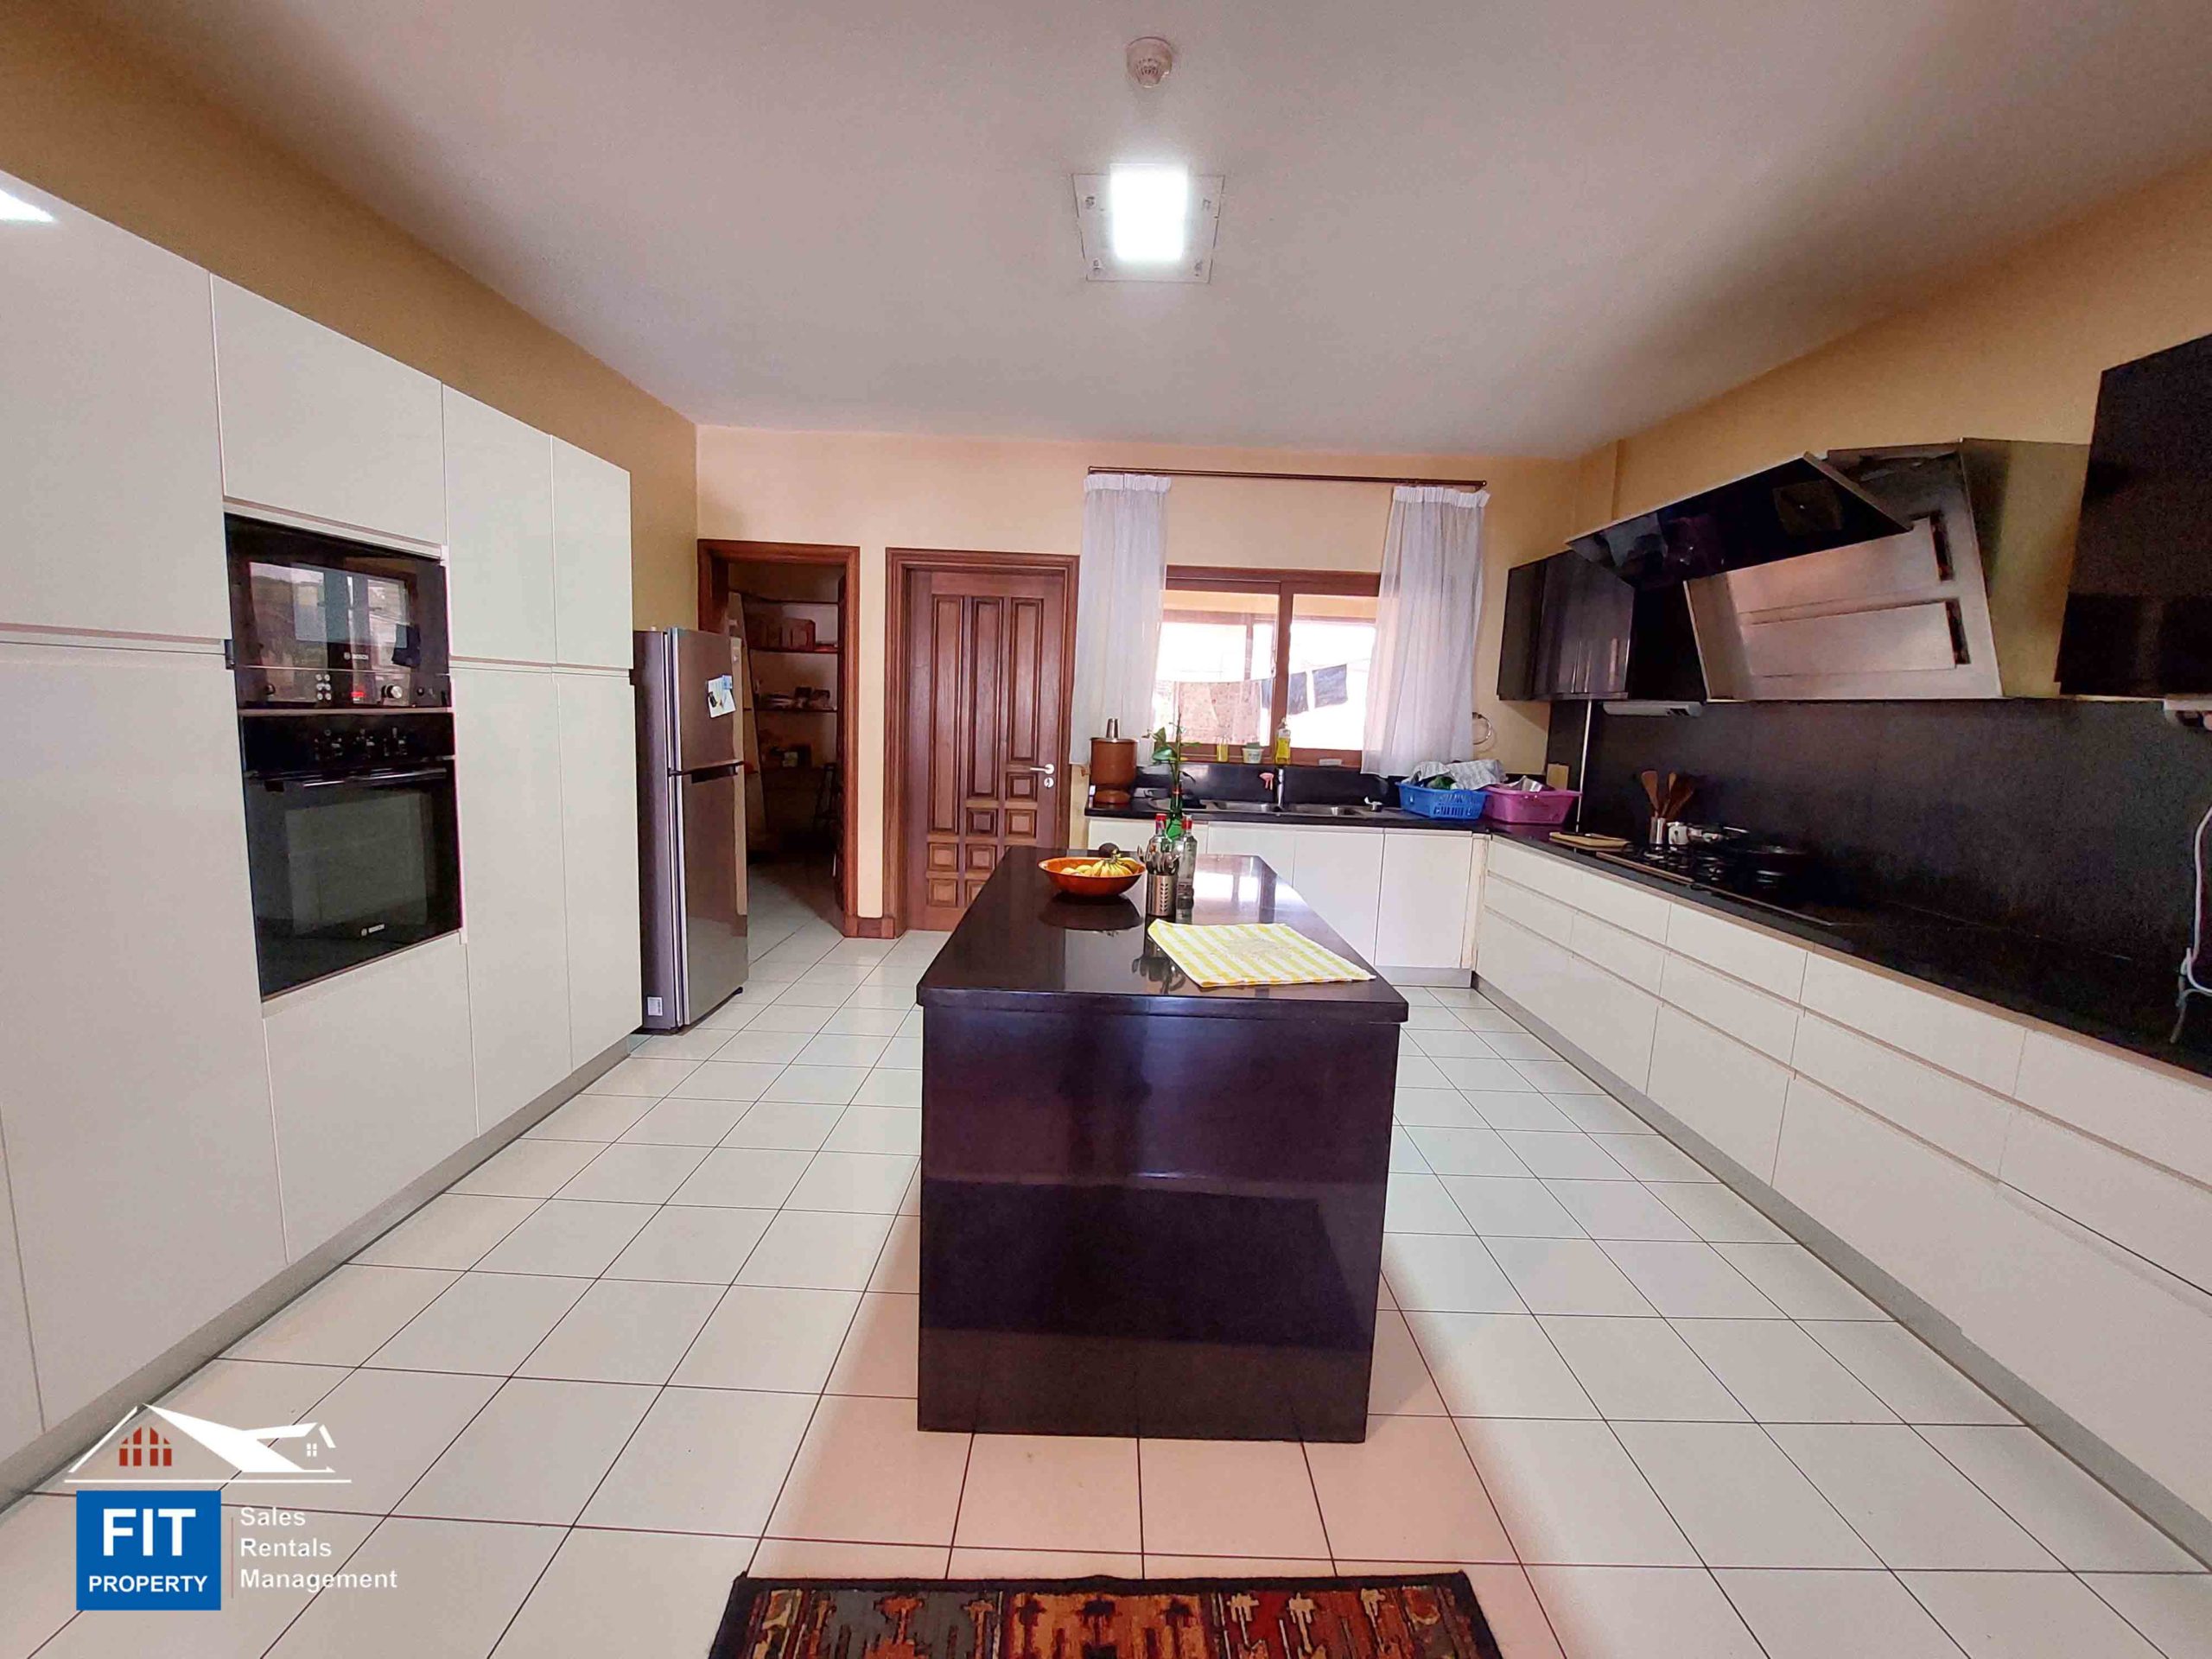 Luxurious 3 Bedroom Apartment in Parklands, Nairobi. Approximately 3000 sq ft. Has fully-equipped gym, a refreshing pool. Price: 35 Million FIT PROPERTY